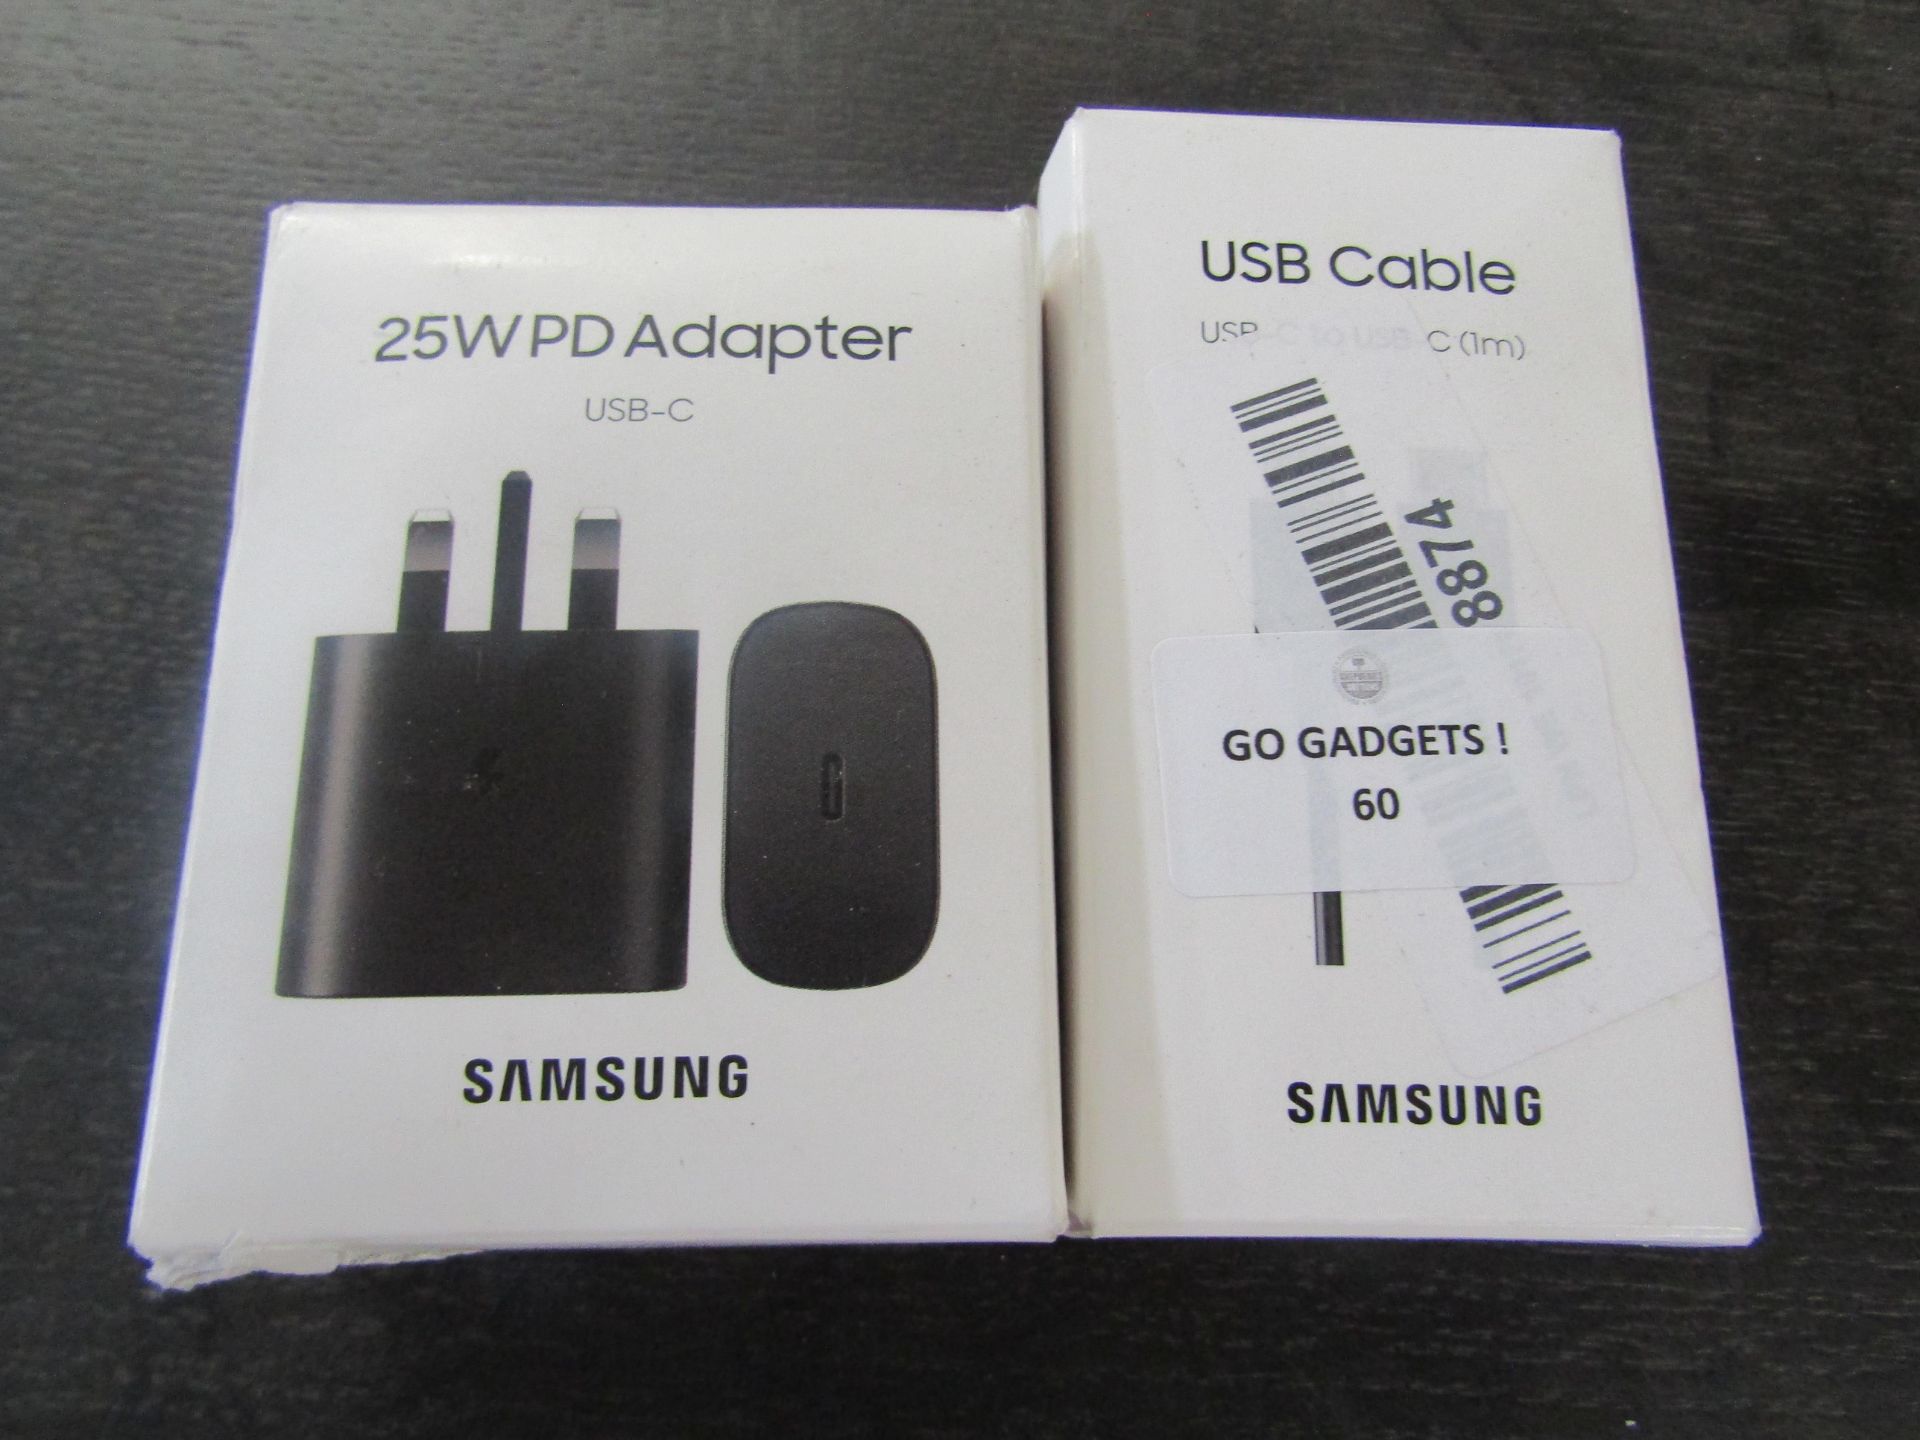 2x Items Being - 1x USB-C To USB-C Cable, 1m - 1x Samsung 25w PD Adapter USB-C - Both Unchecked &